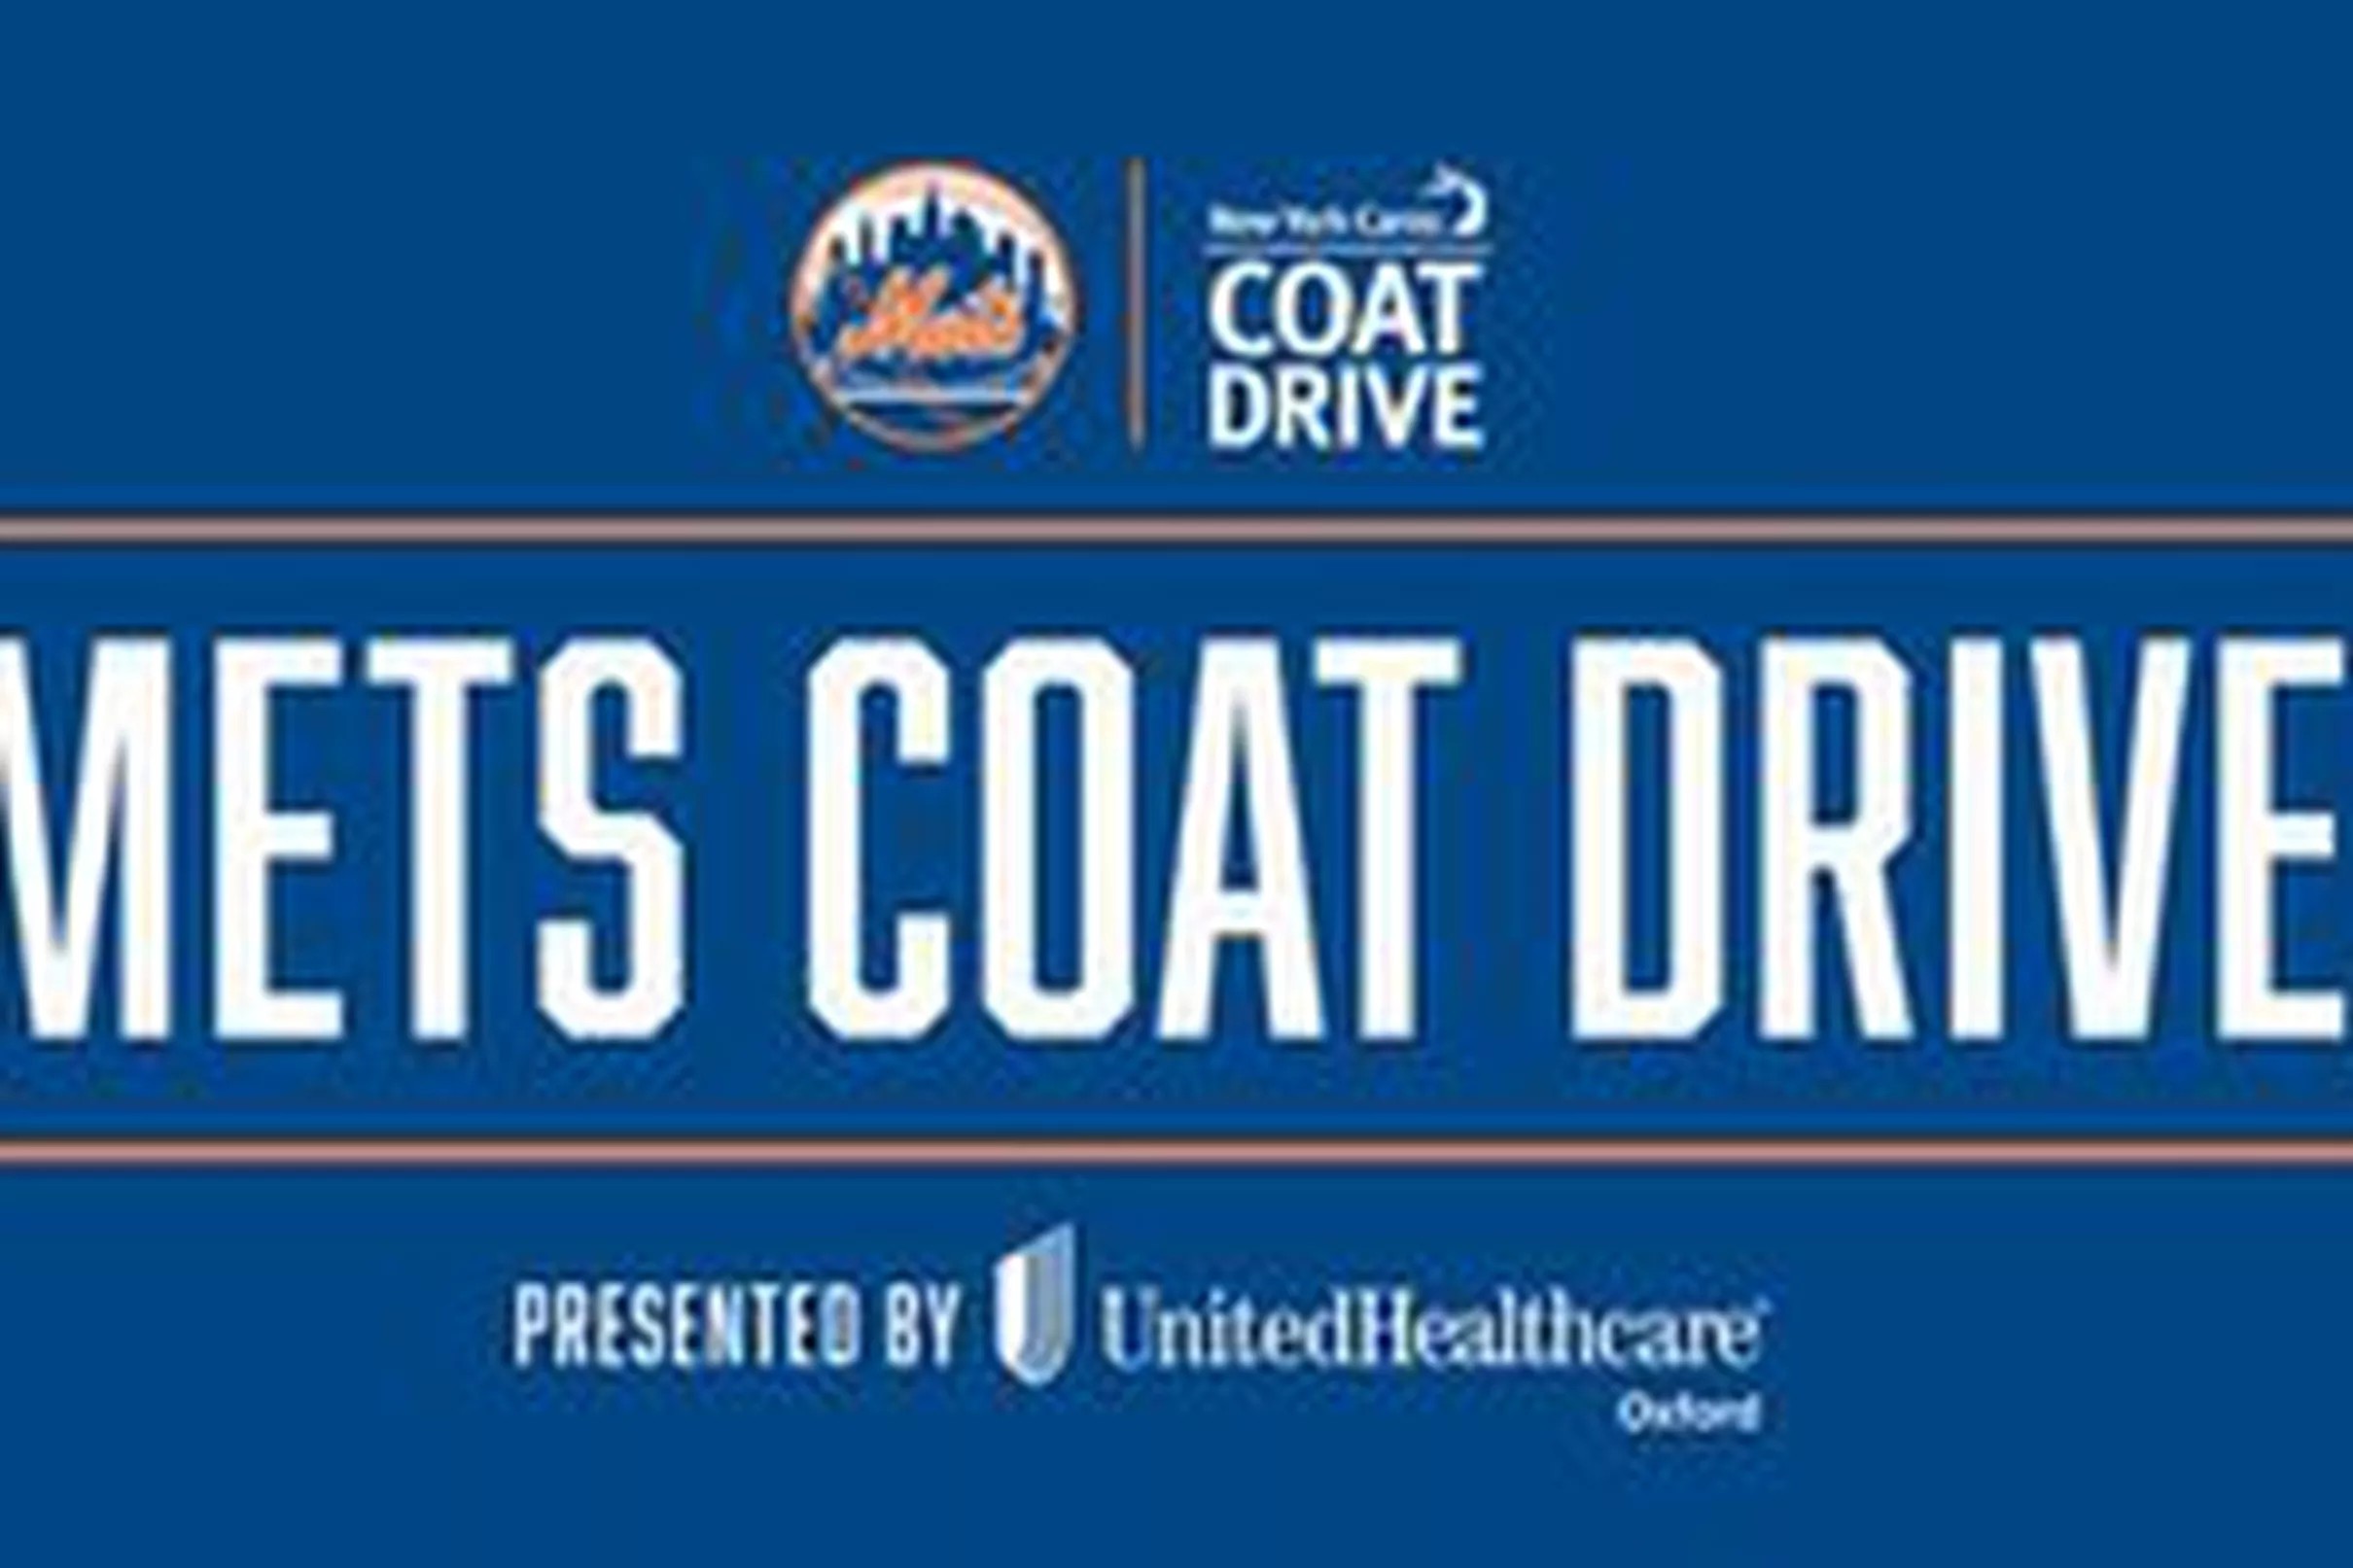 Mets to host Holiday Coat Drive on November 14